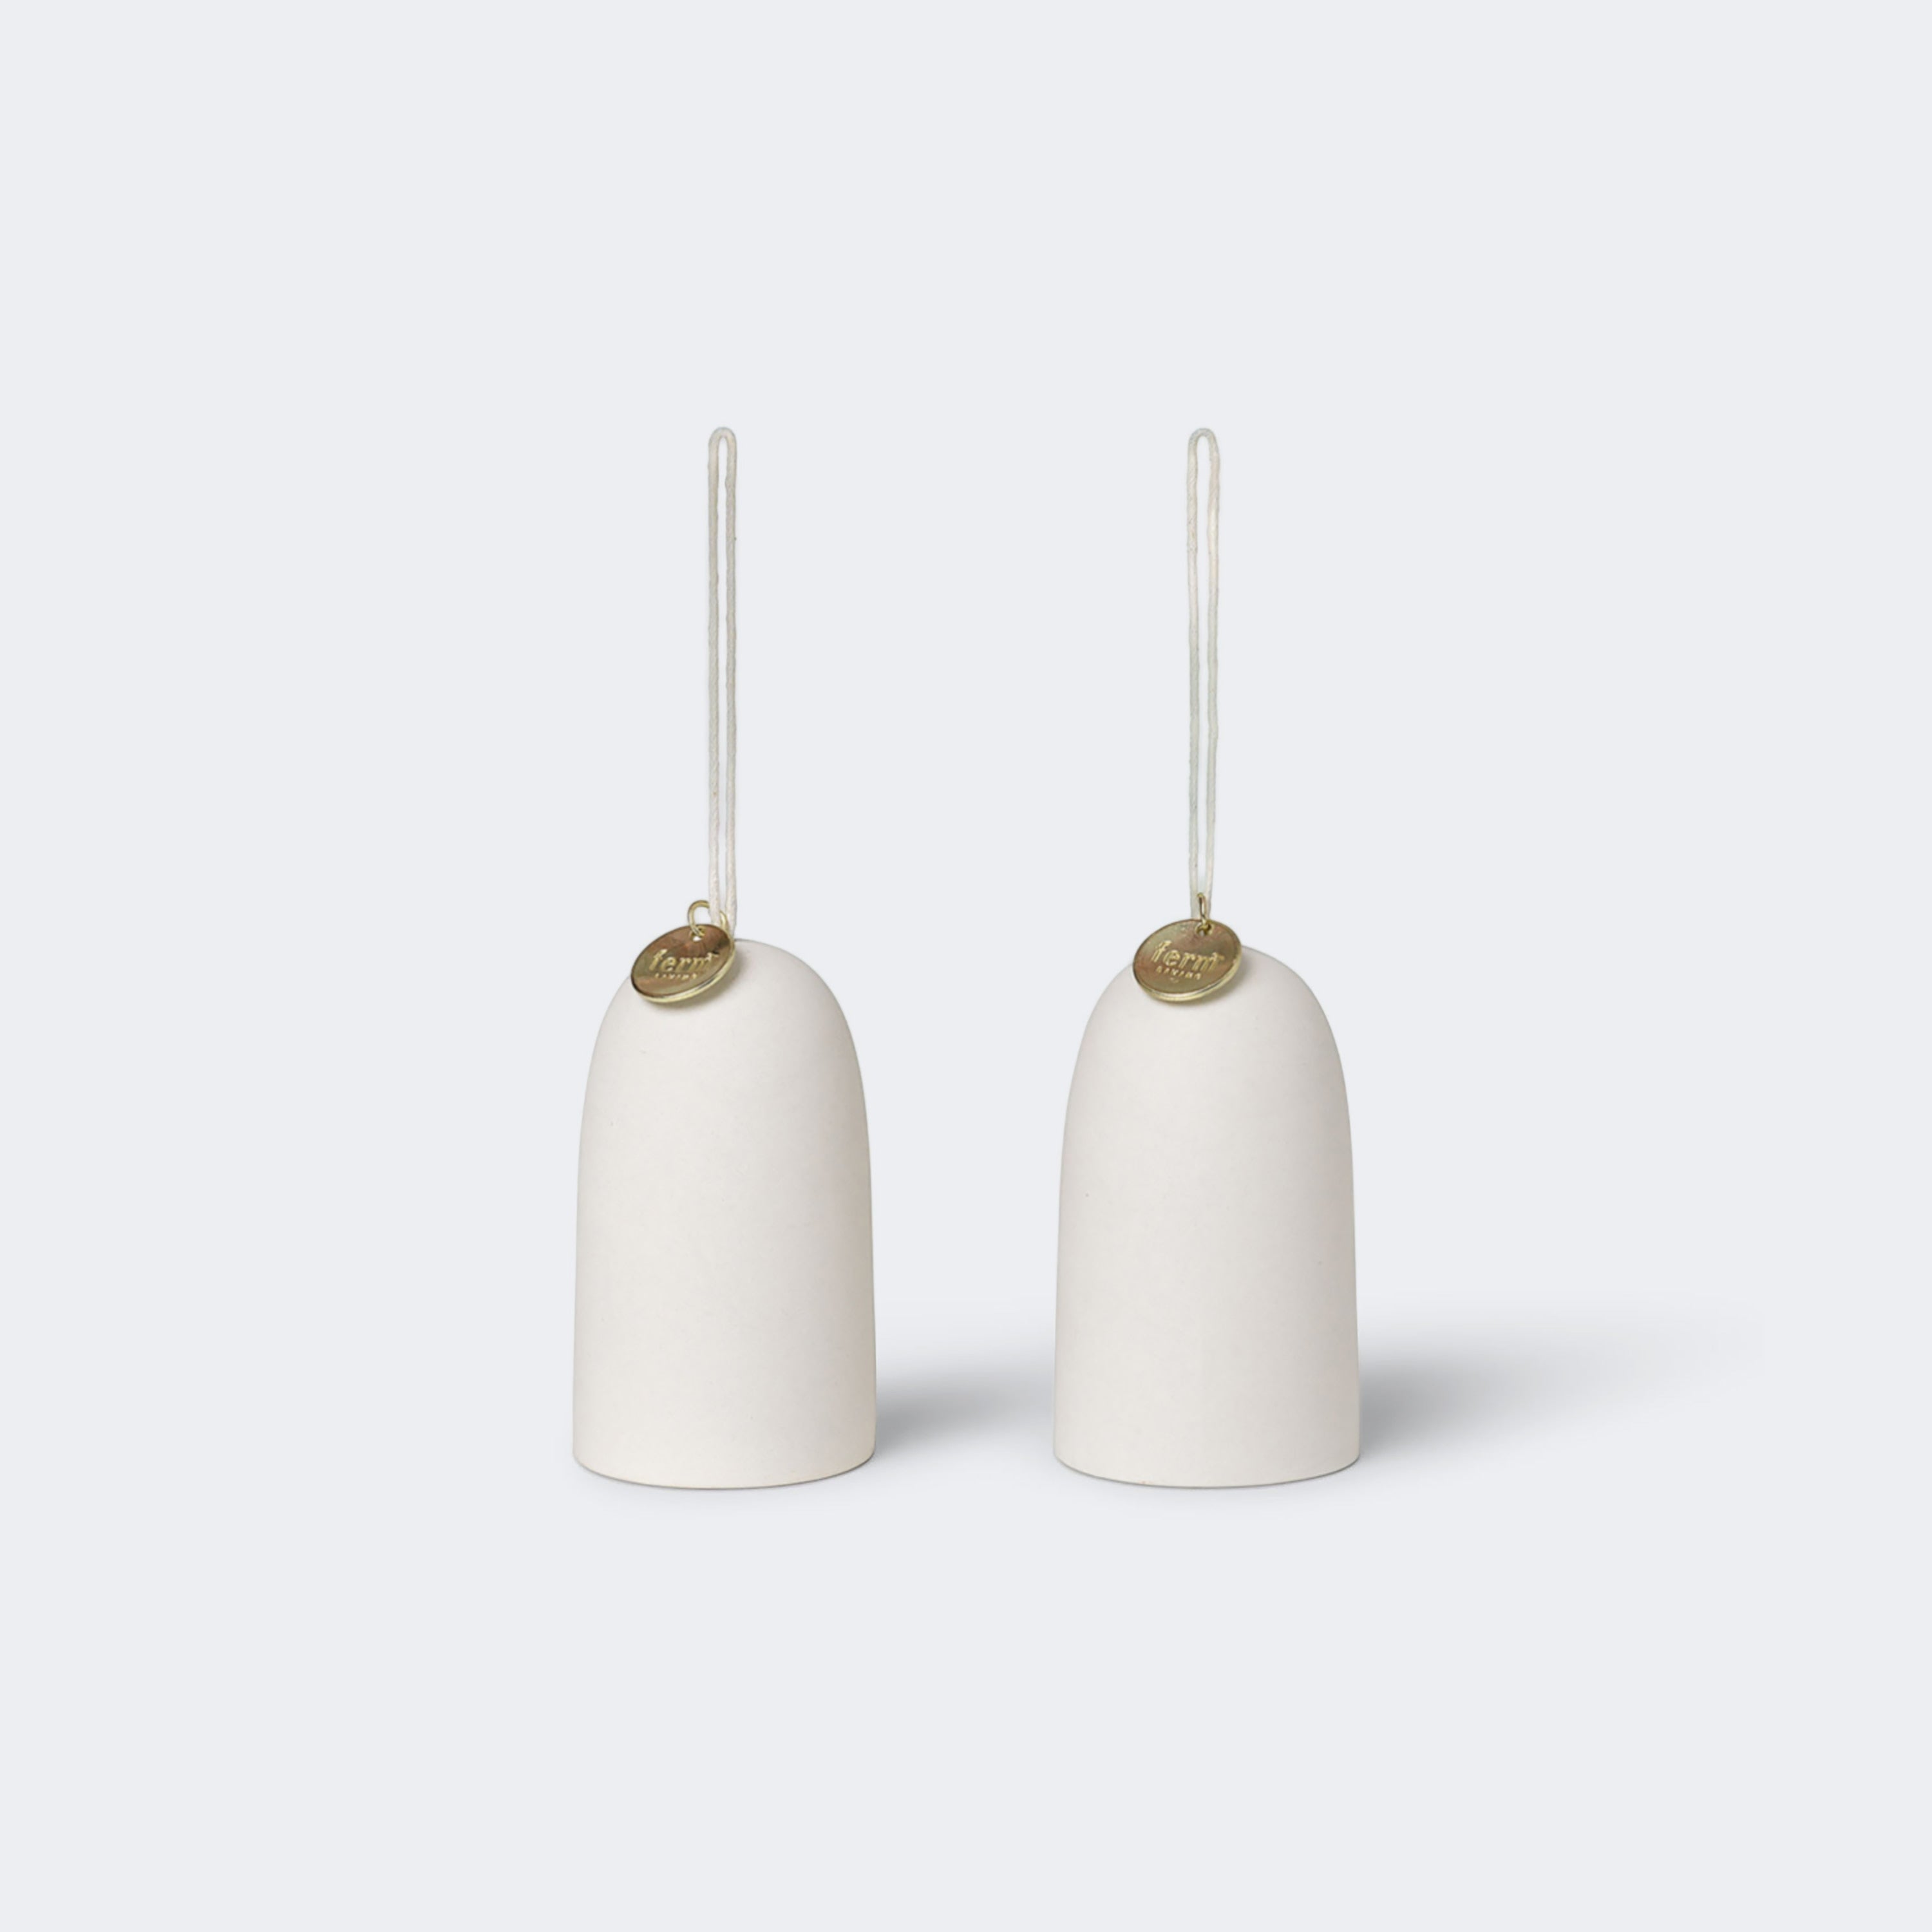 Ferm Living Bell Ceramic Ornaments - Set of 2 Off-White - KANSO